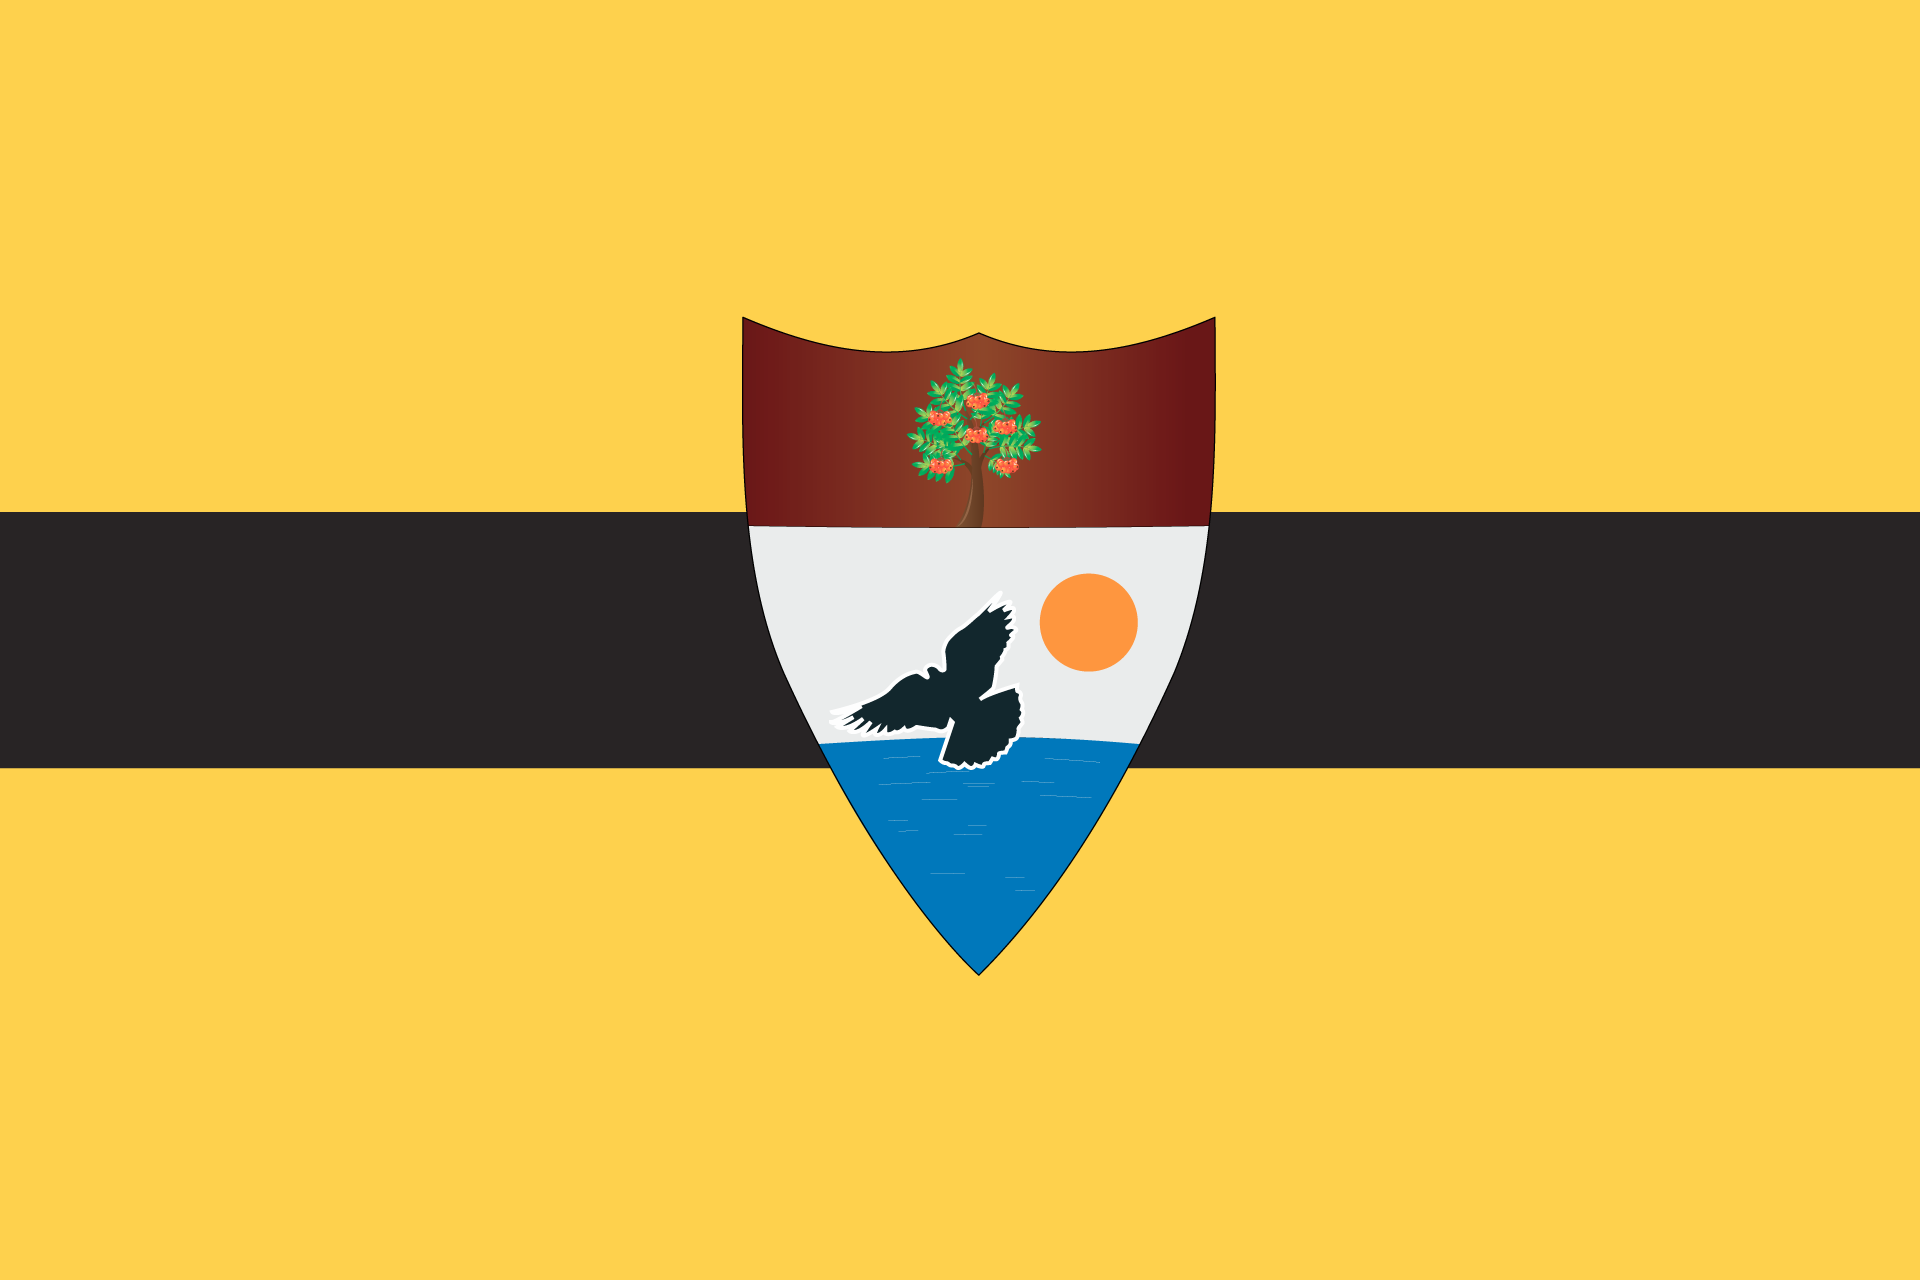 Will You Be Moving to Liberland?